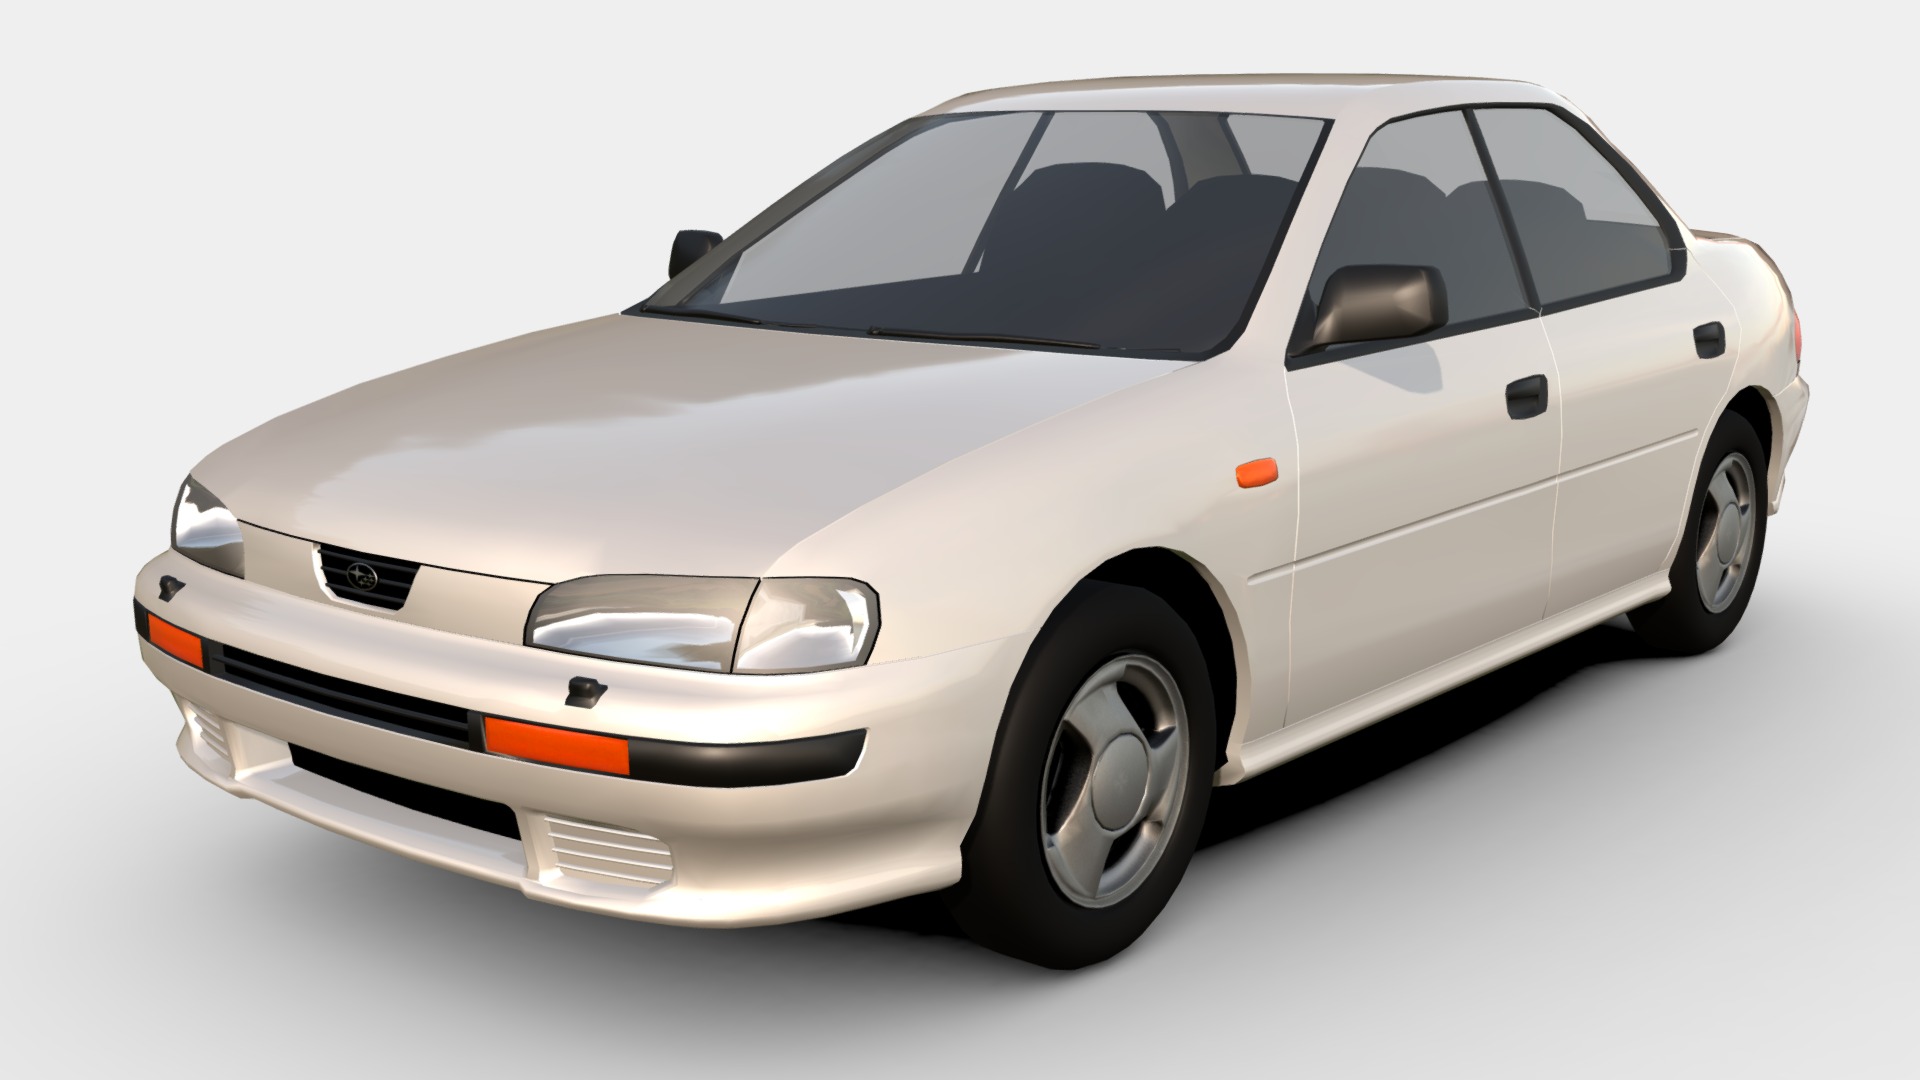 3D model Subaru Impreza 1.6 1994 - This is a 3D model of the Subaru Impreza 1.6 1994. The 3D model is about a white car with a black roof.